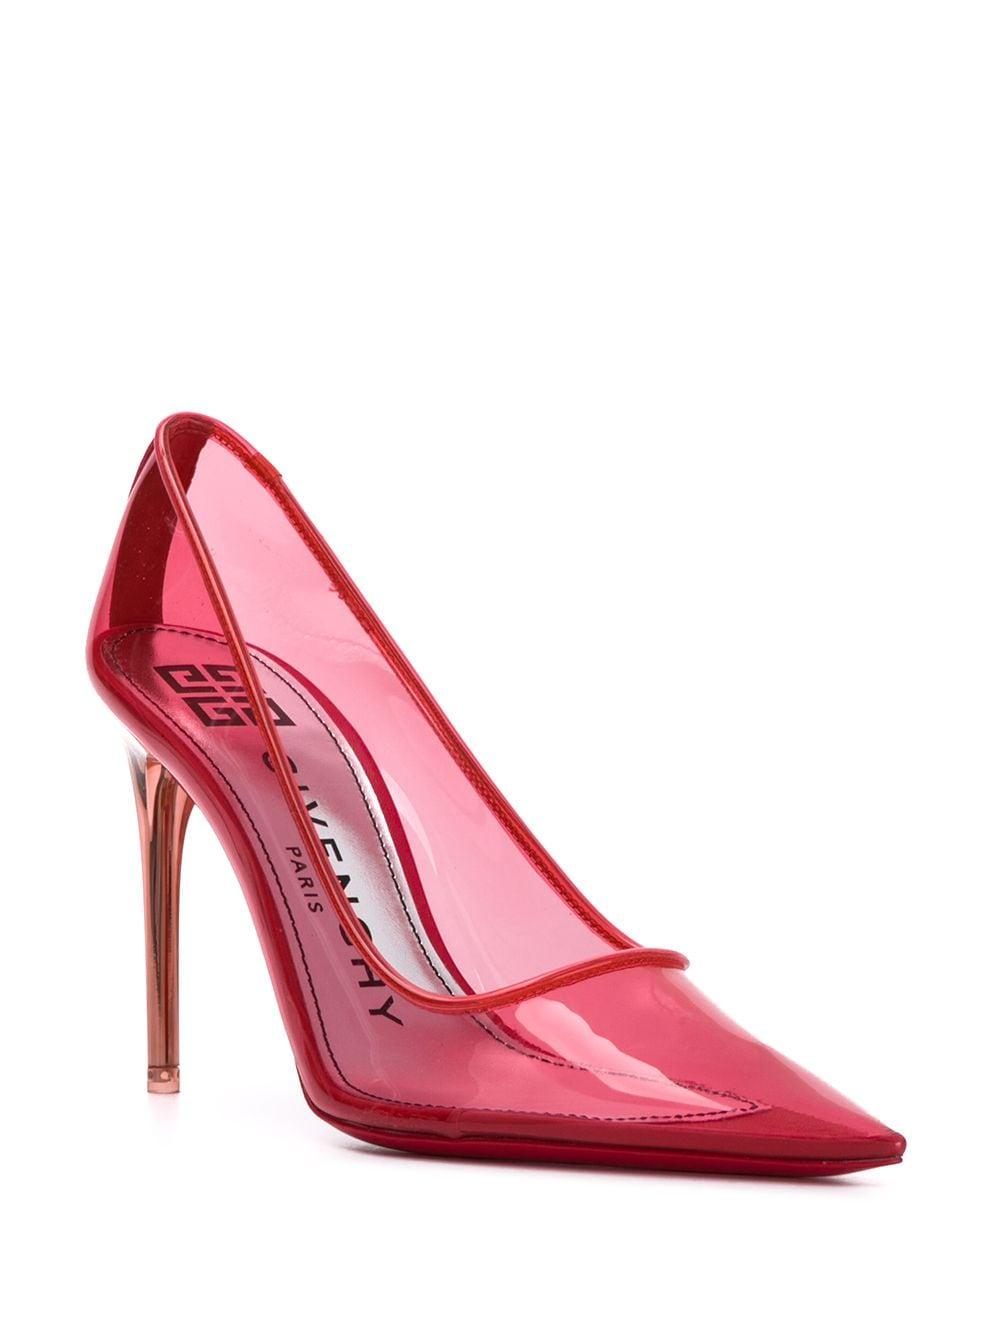 Givenchy Transparent Pointed Pumps in Pink | Lyst